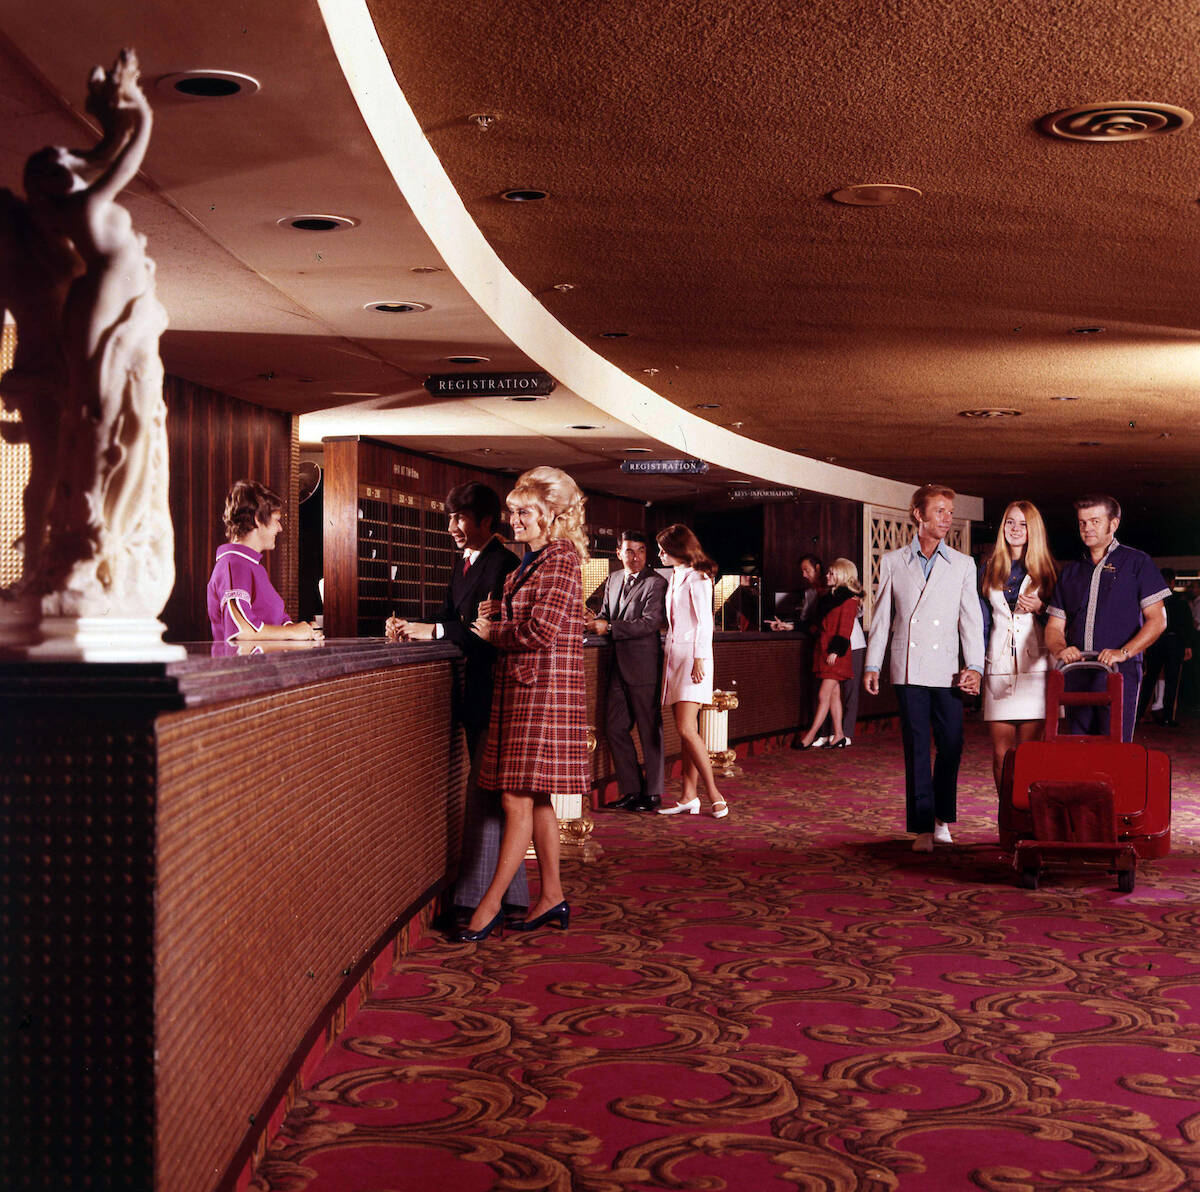 The furniture design at Caesars Palace in 1966 represents Rococo Modernism, a style common duri ...